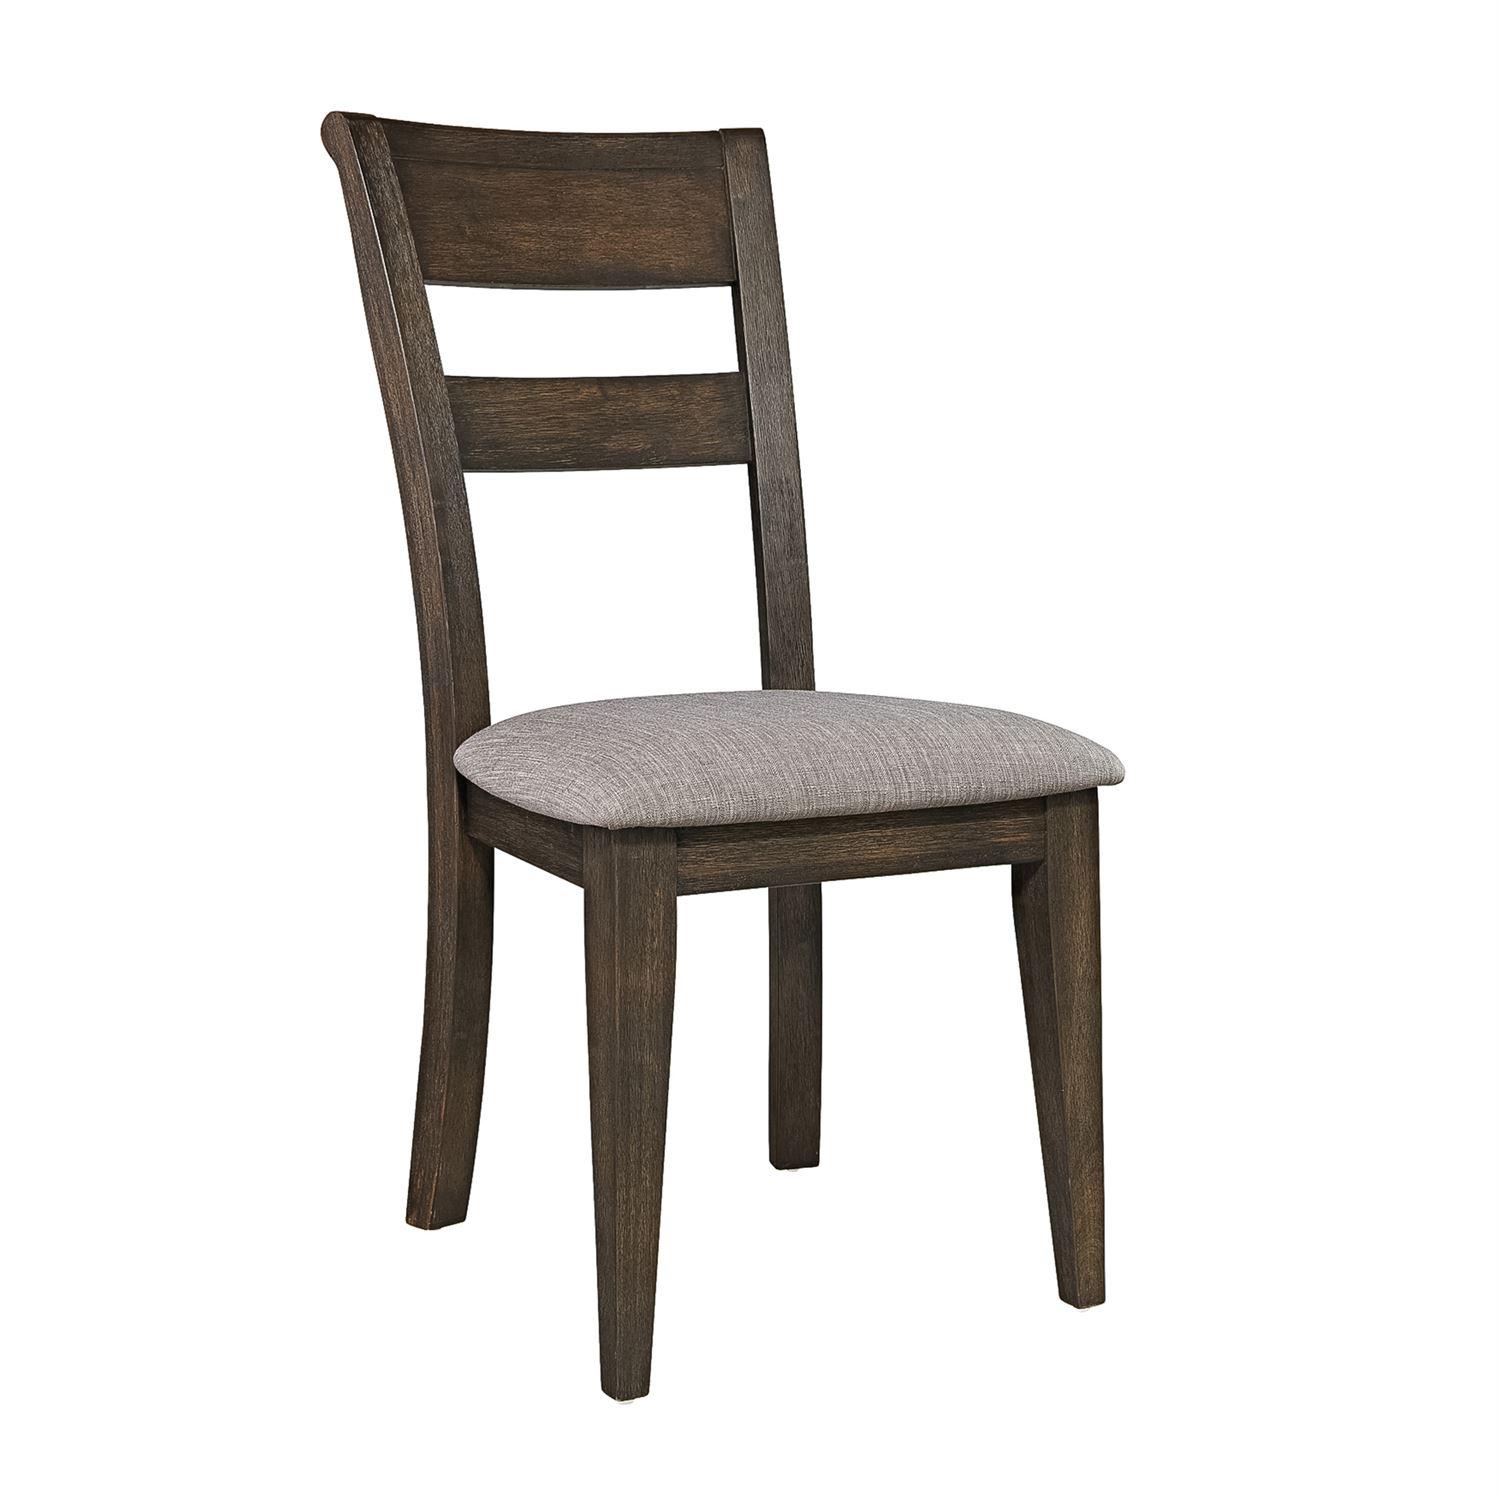 Rustic Dining Side Chair Double Bridge  (152-CD) Dining Side Chair 152-C2501S in Chestnut Fabric